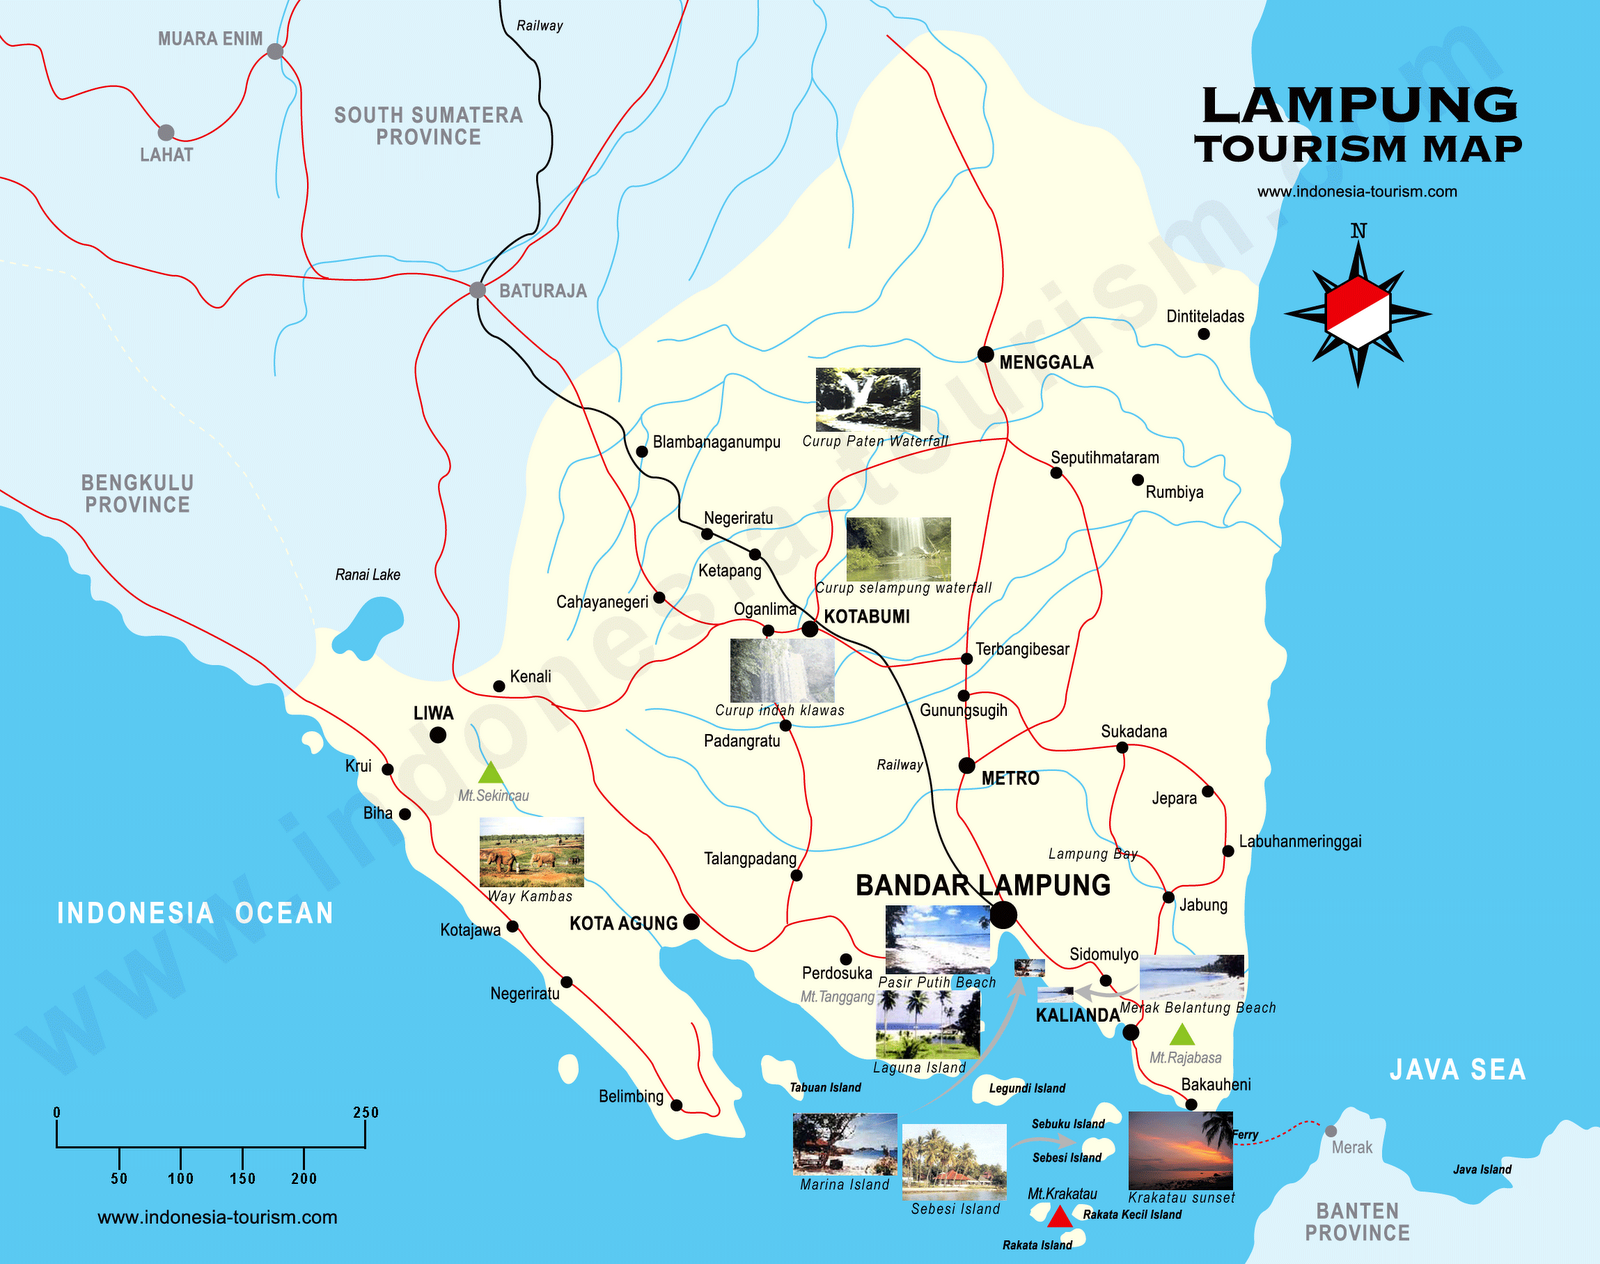  Lampung  Indonesia Travel Guide Travel to Life